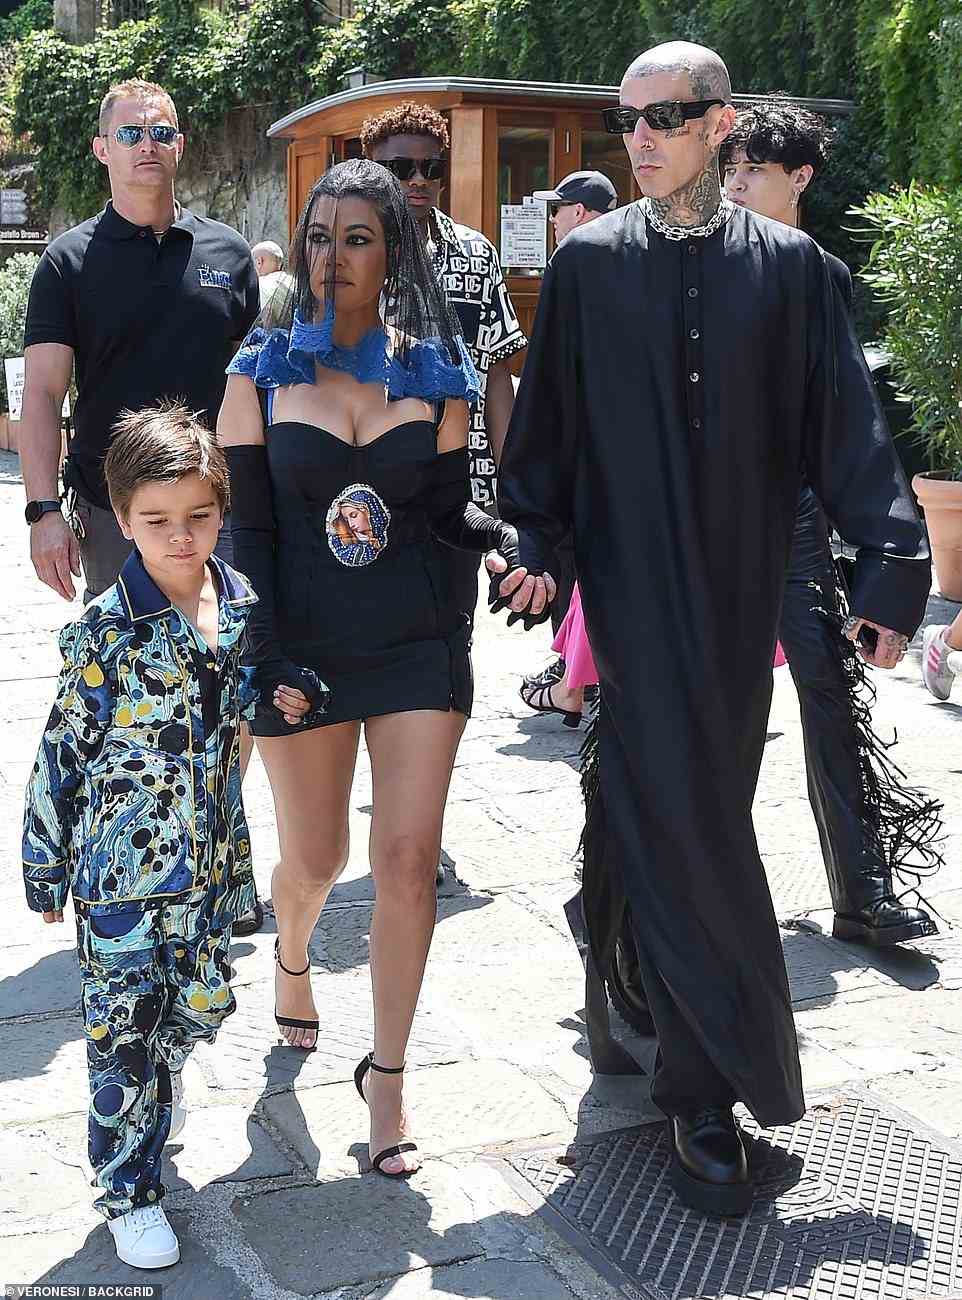 Bride to be: Kourtney donned a black sheer veil with blue lace detail and Travis wore a full-length gown as the pair strolled with Reign